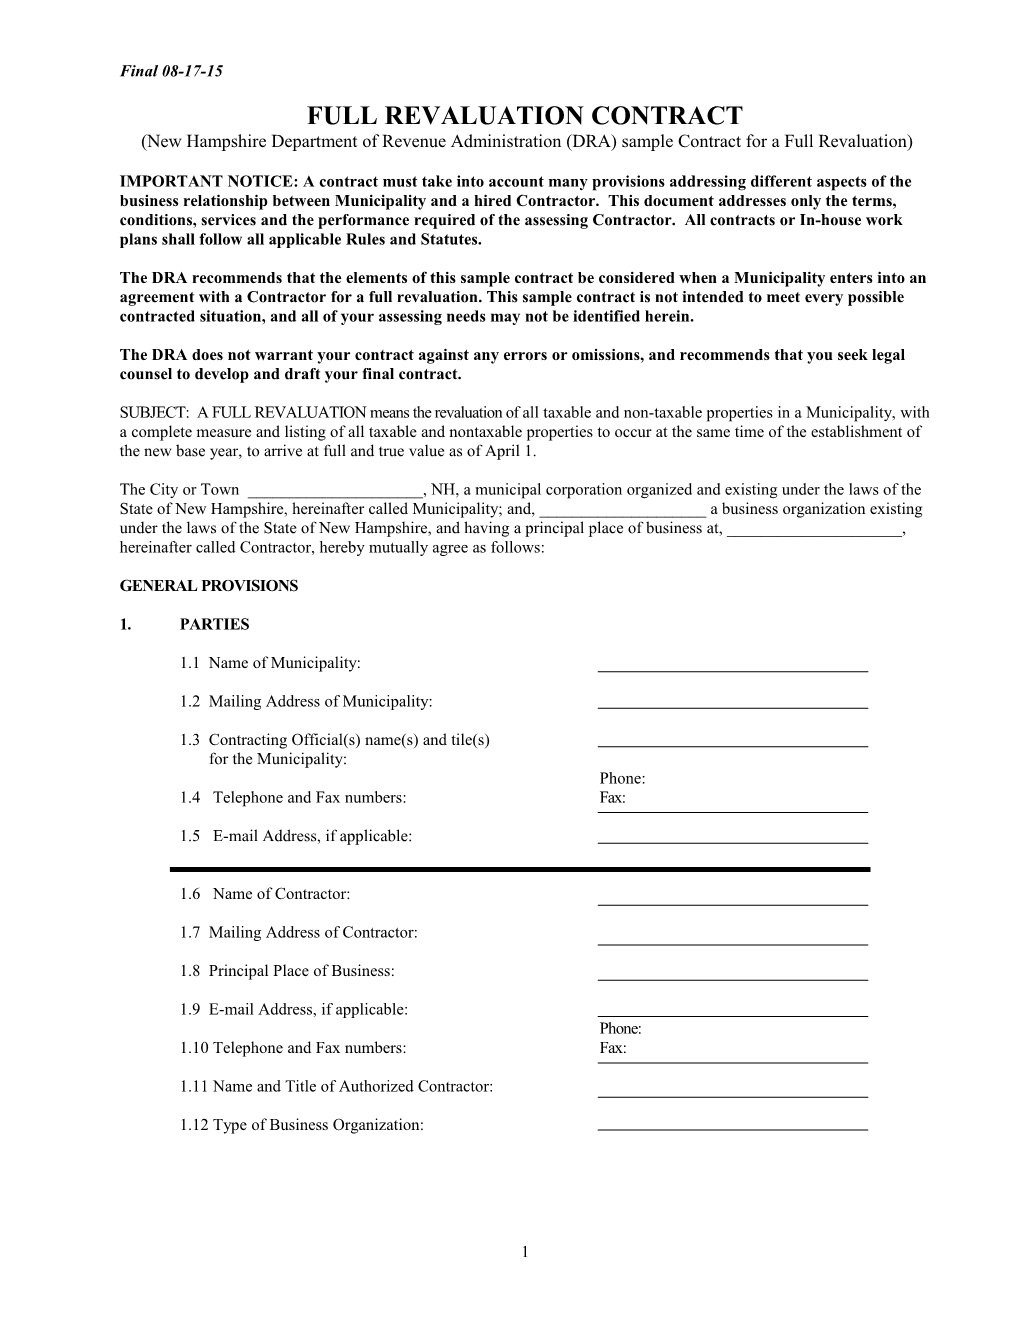 (New Hampshire Department of Revenueadministration (DRA) Sample Contract for a Full